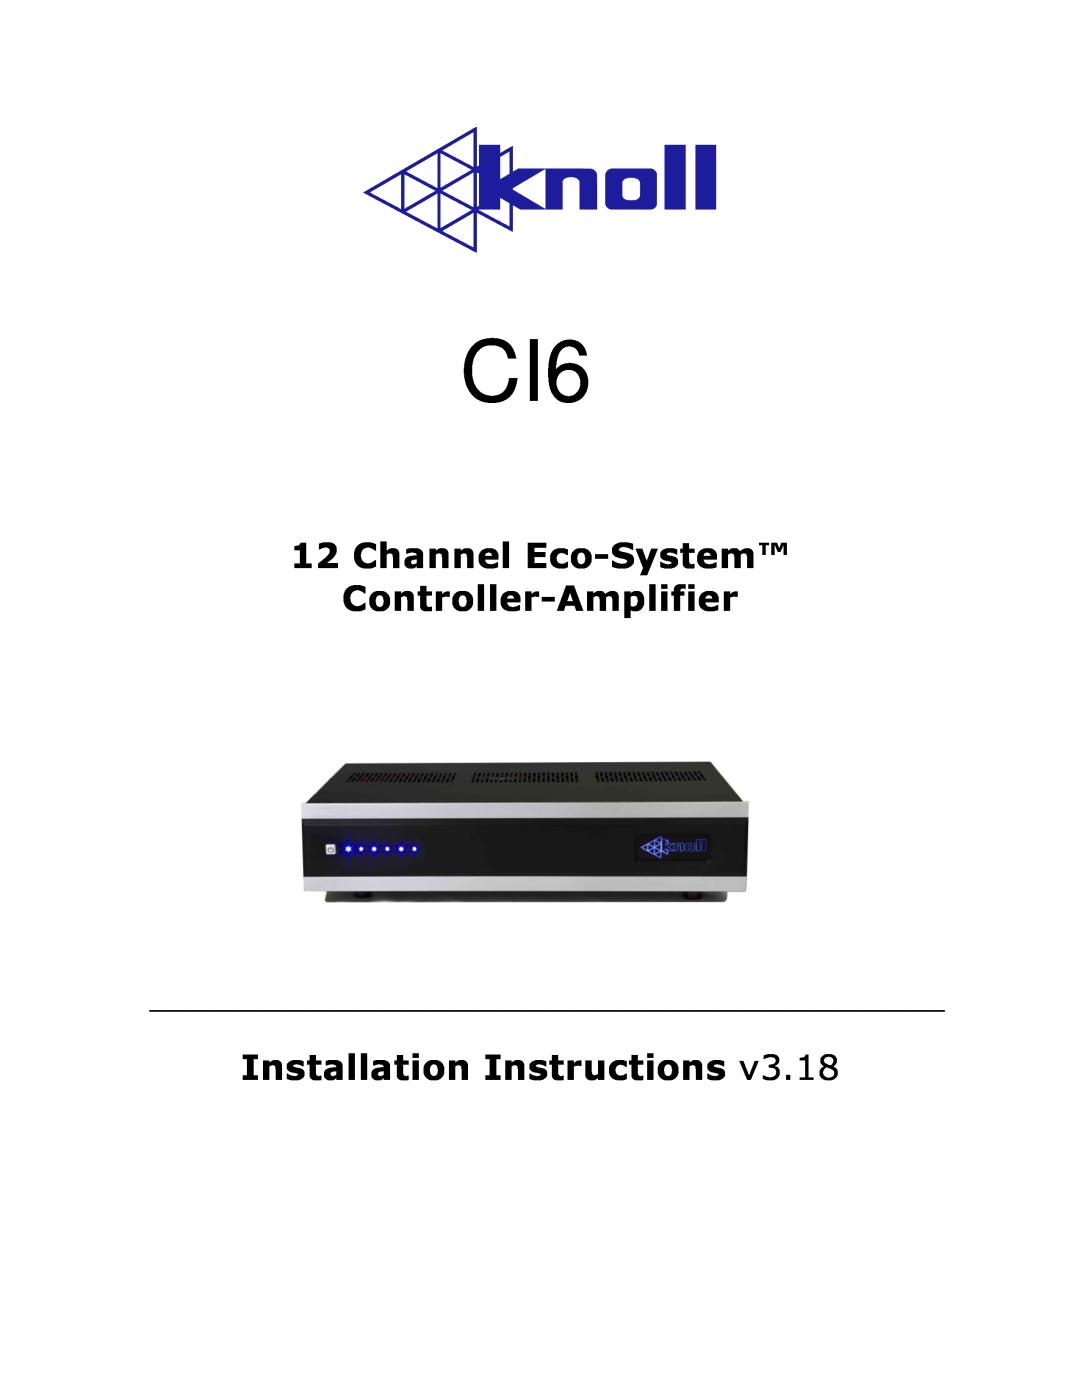 Knoll Systems C16 installation instructions 12Channel Eco-System Controller-Amplifier, Installation Instructions 